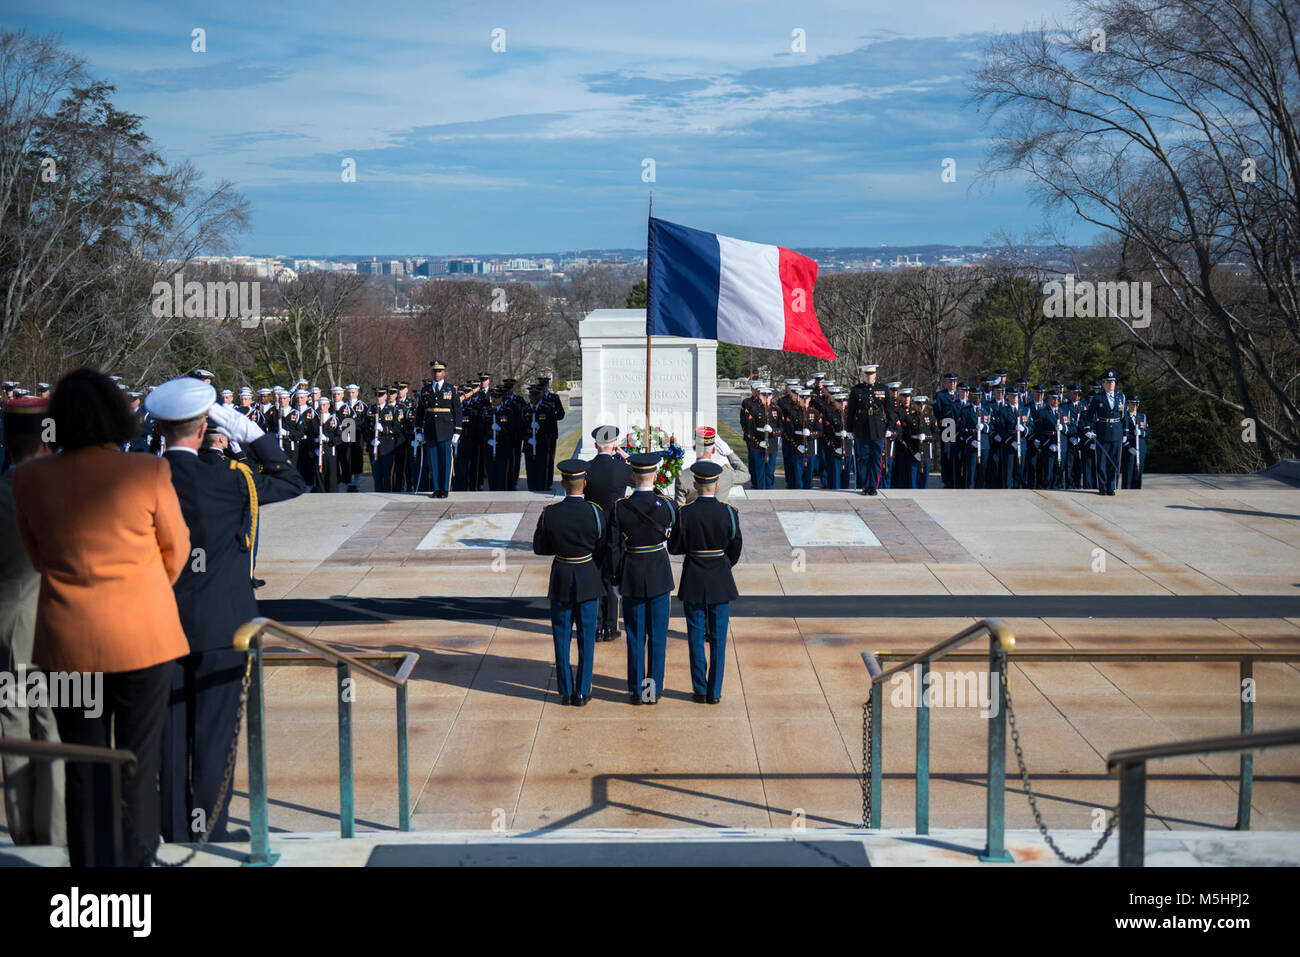 Maj. Gen. John P. Sullivan (left), assistant deputy chief of staff, G-4; and Gen. François Lecointre (right), chief of the defence staff, French Armed Forces;  render honors during an Armed Forces Full Honors Wreath-Laying Ceremony at the Tomb of the Unknown Soldier at Arlington National Cemetery, Arlington, Virginia, Feb. 12, 2018. Lecointre visited ANC as part of his first official visit, touring the Memorial Amphitheater Display Room and meeting with ANC Senior Leadership. (U.S. Army Stock Photo